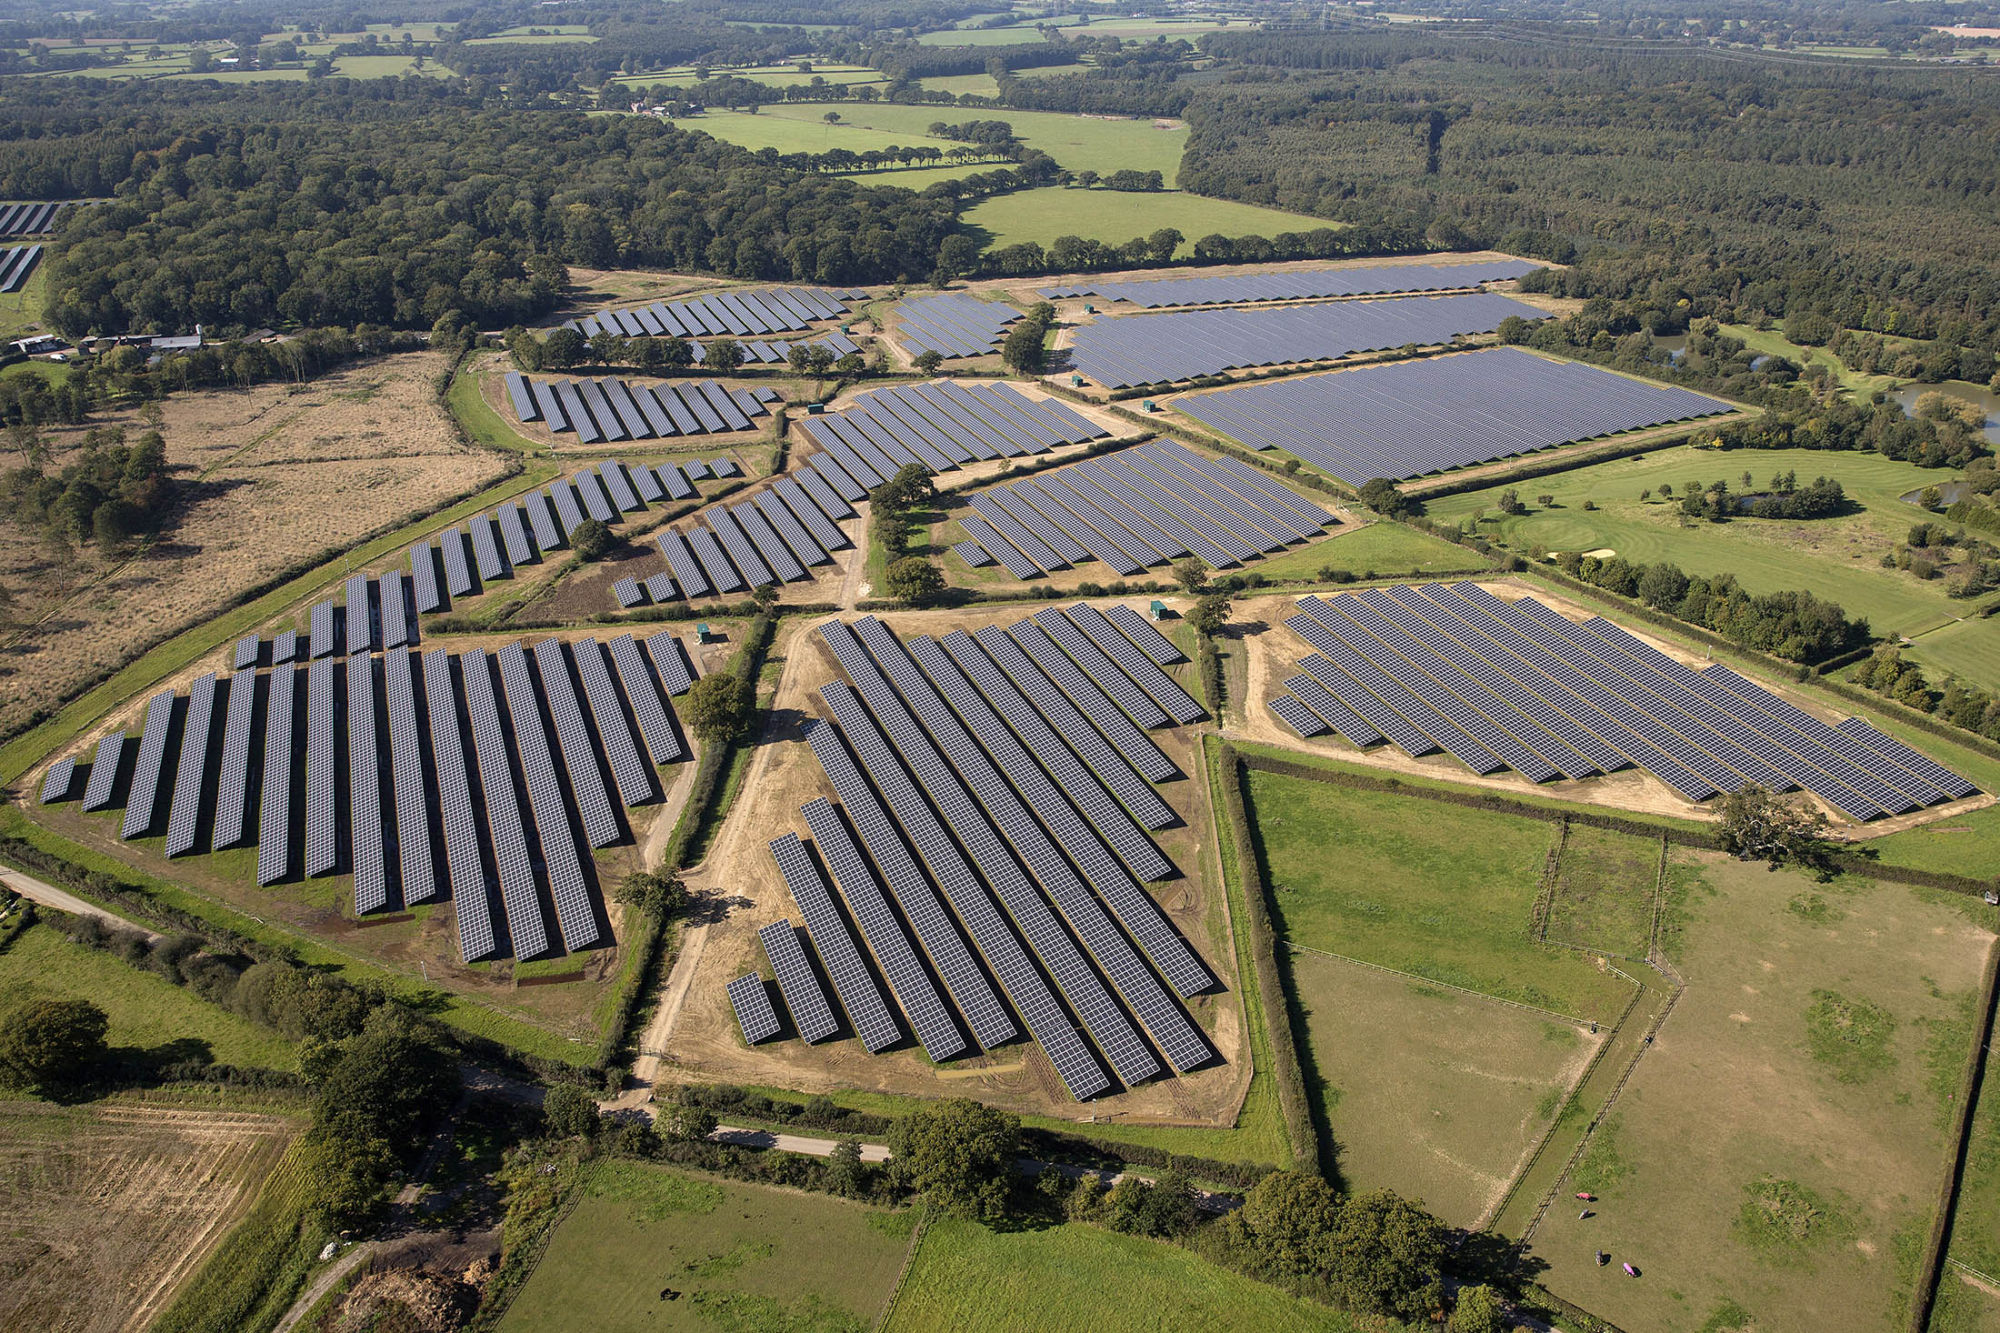 Solar panels sit in an array at the Southwick Estate Solar Farm, operated by Primrose Solar Ltd., near Fareham, U.K., on Friday, Oct. 2, 2015. The plant, situated in 200 acres (81 hectares) of farmland, consists of 175,000 monocrystalline PV modules and has a capacity of 48 megawatts.
